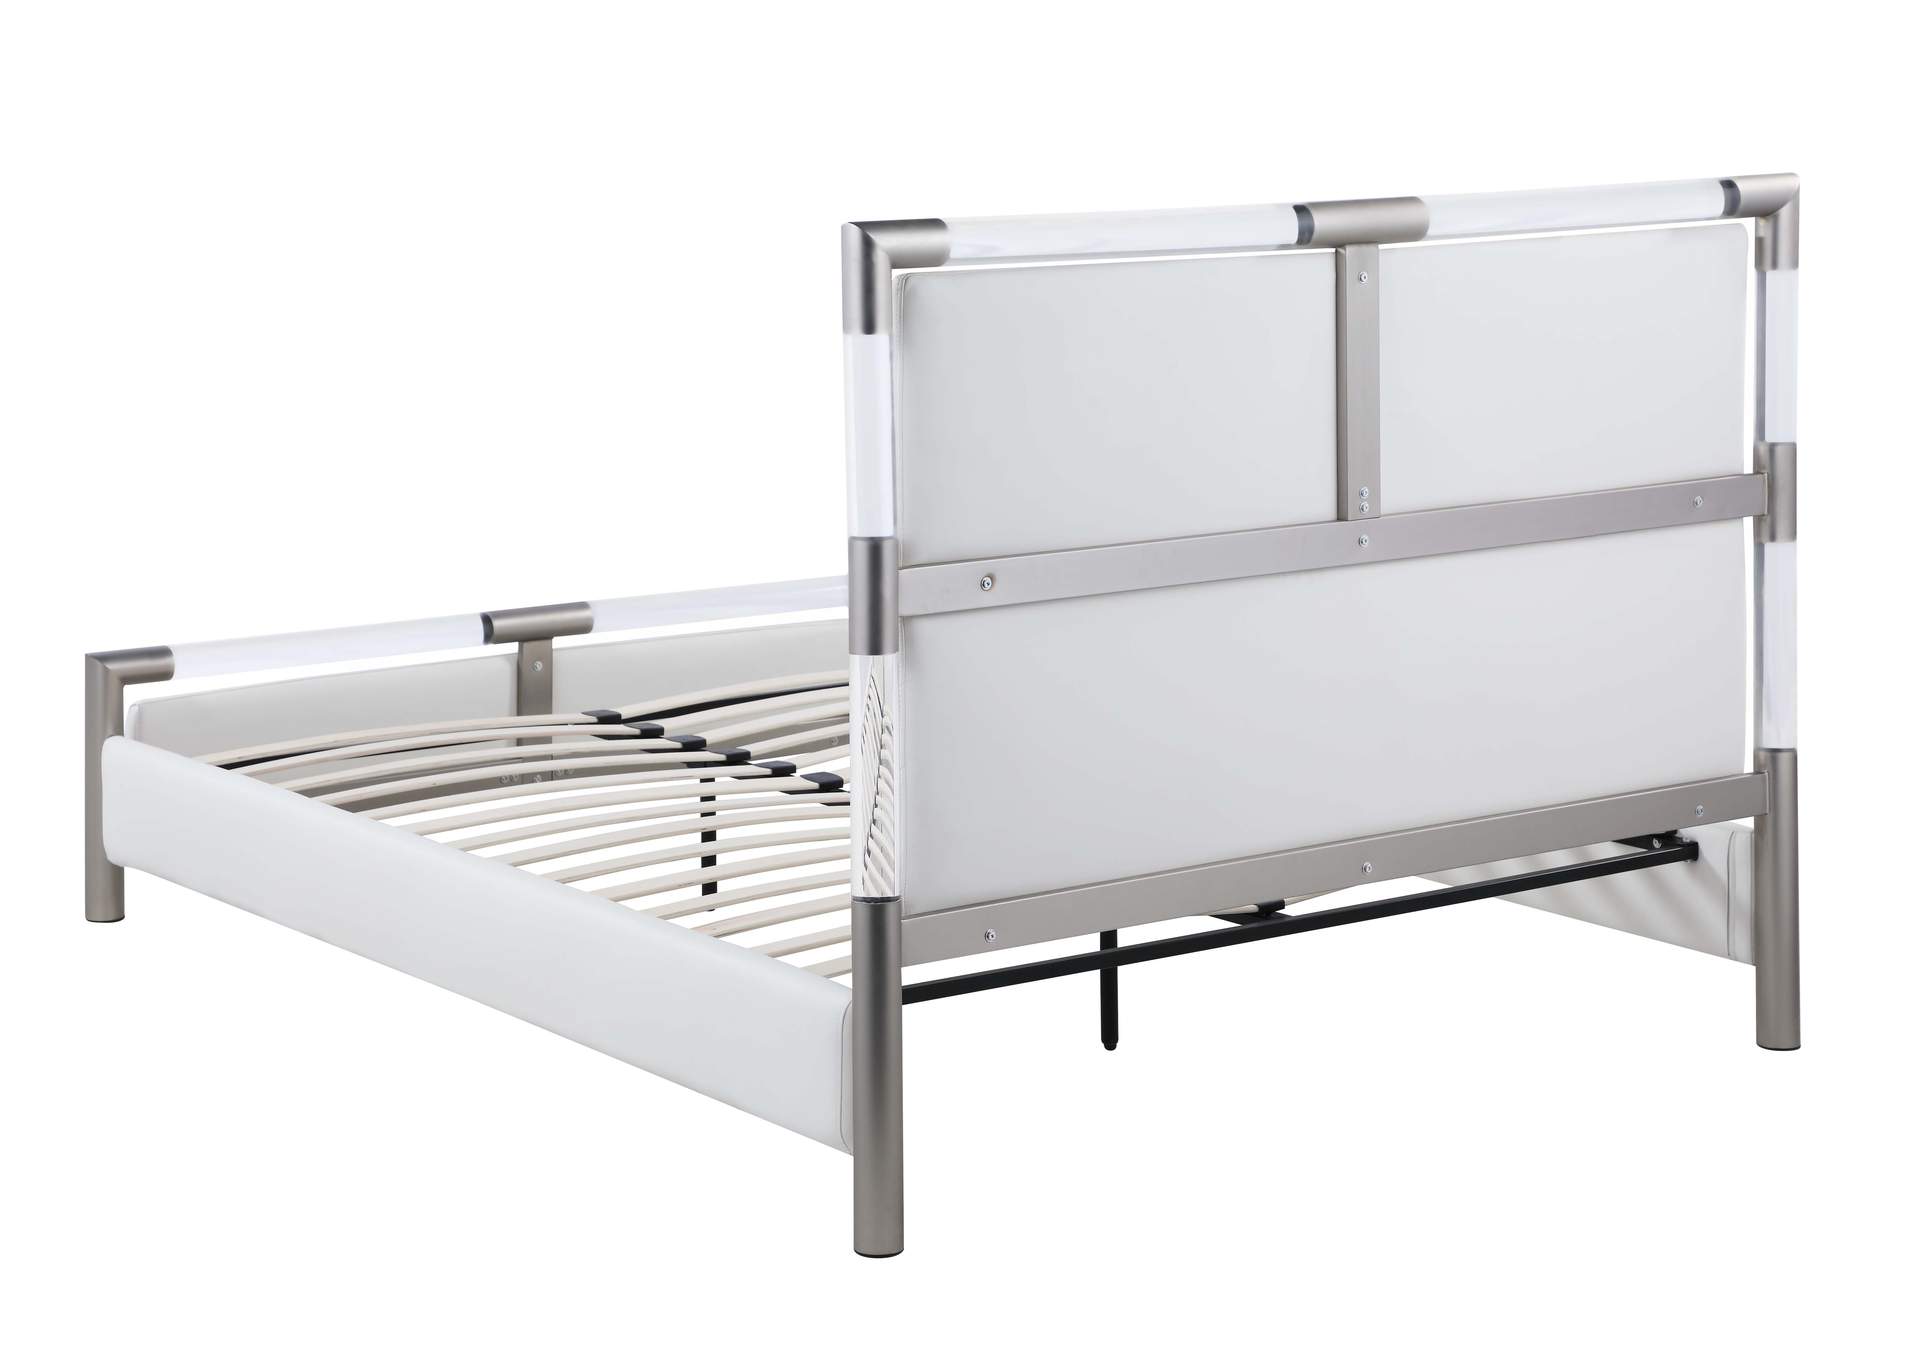 Upholstered King Bed w/ Solid Acrylic and Brushed Nickel Frame,Chintaly Imports